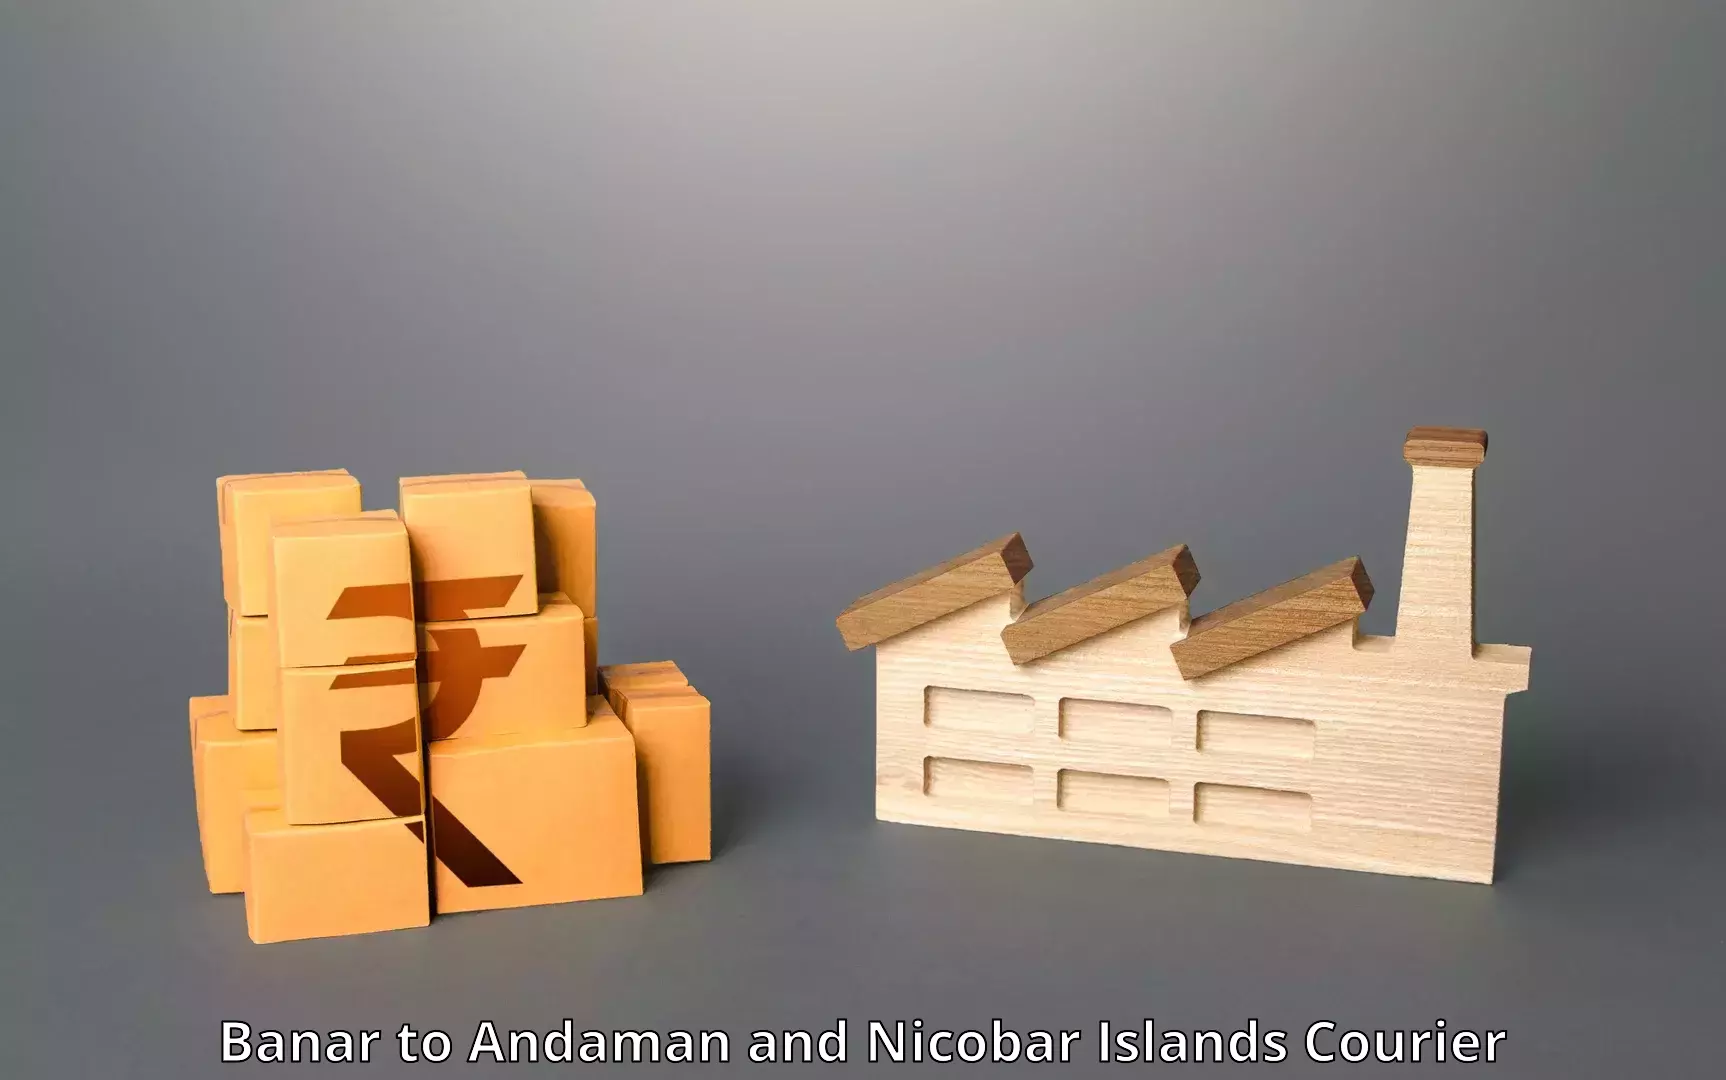 Global courier networks Banar to Andaman and Nicobar Islands